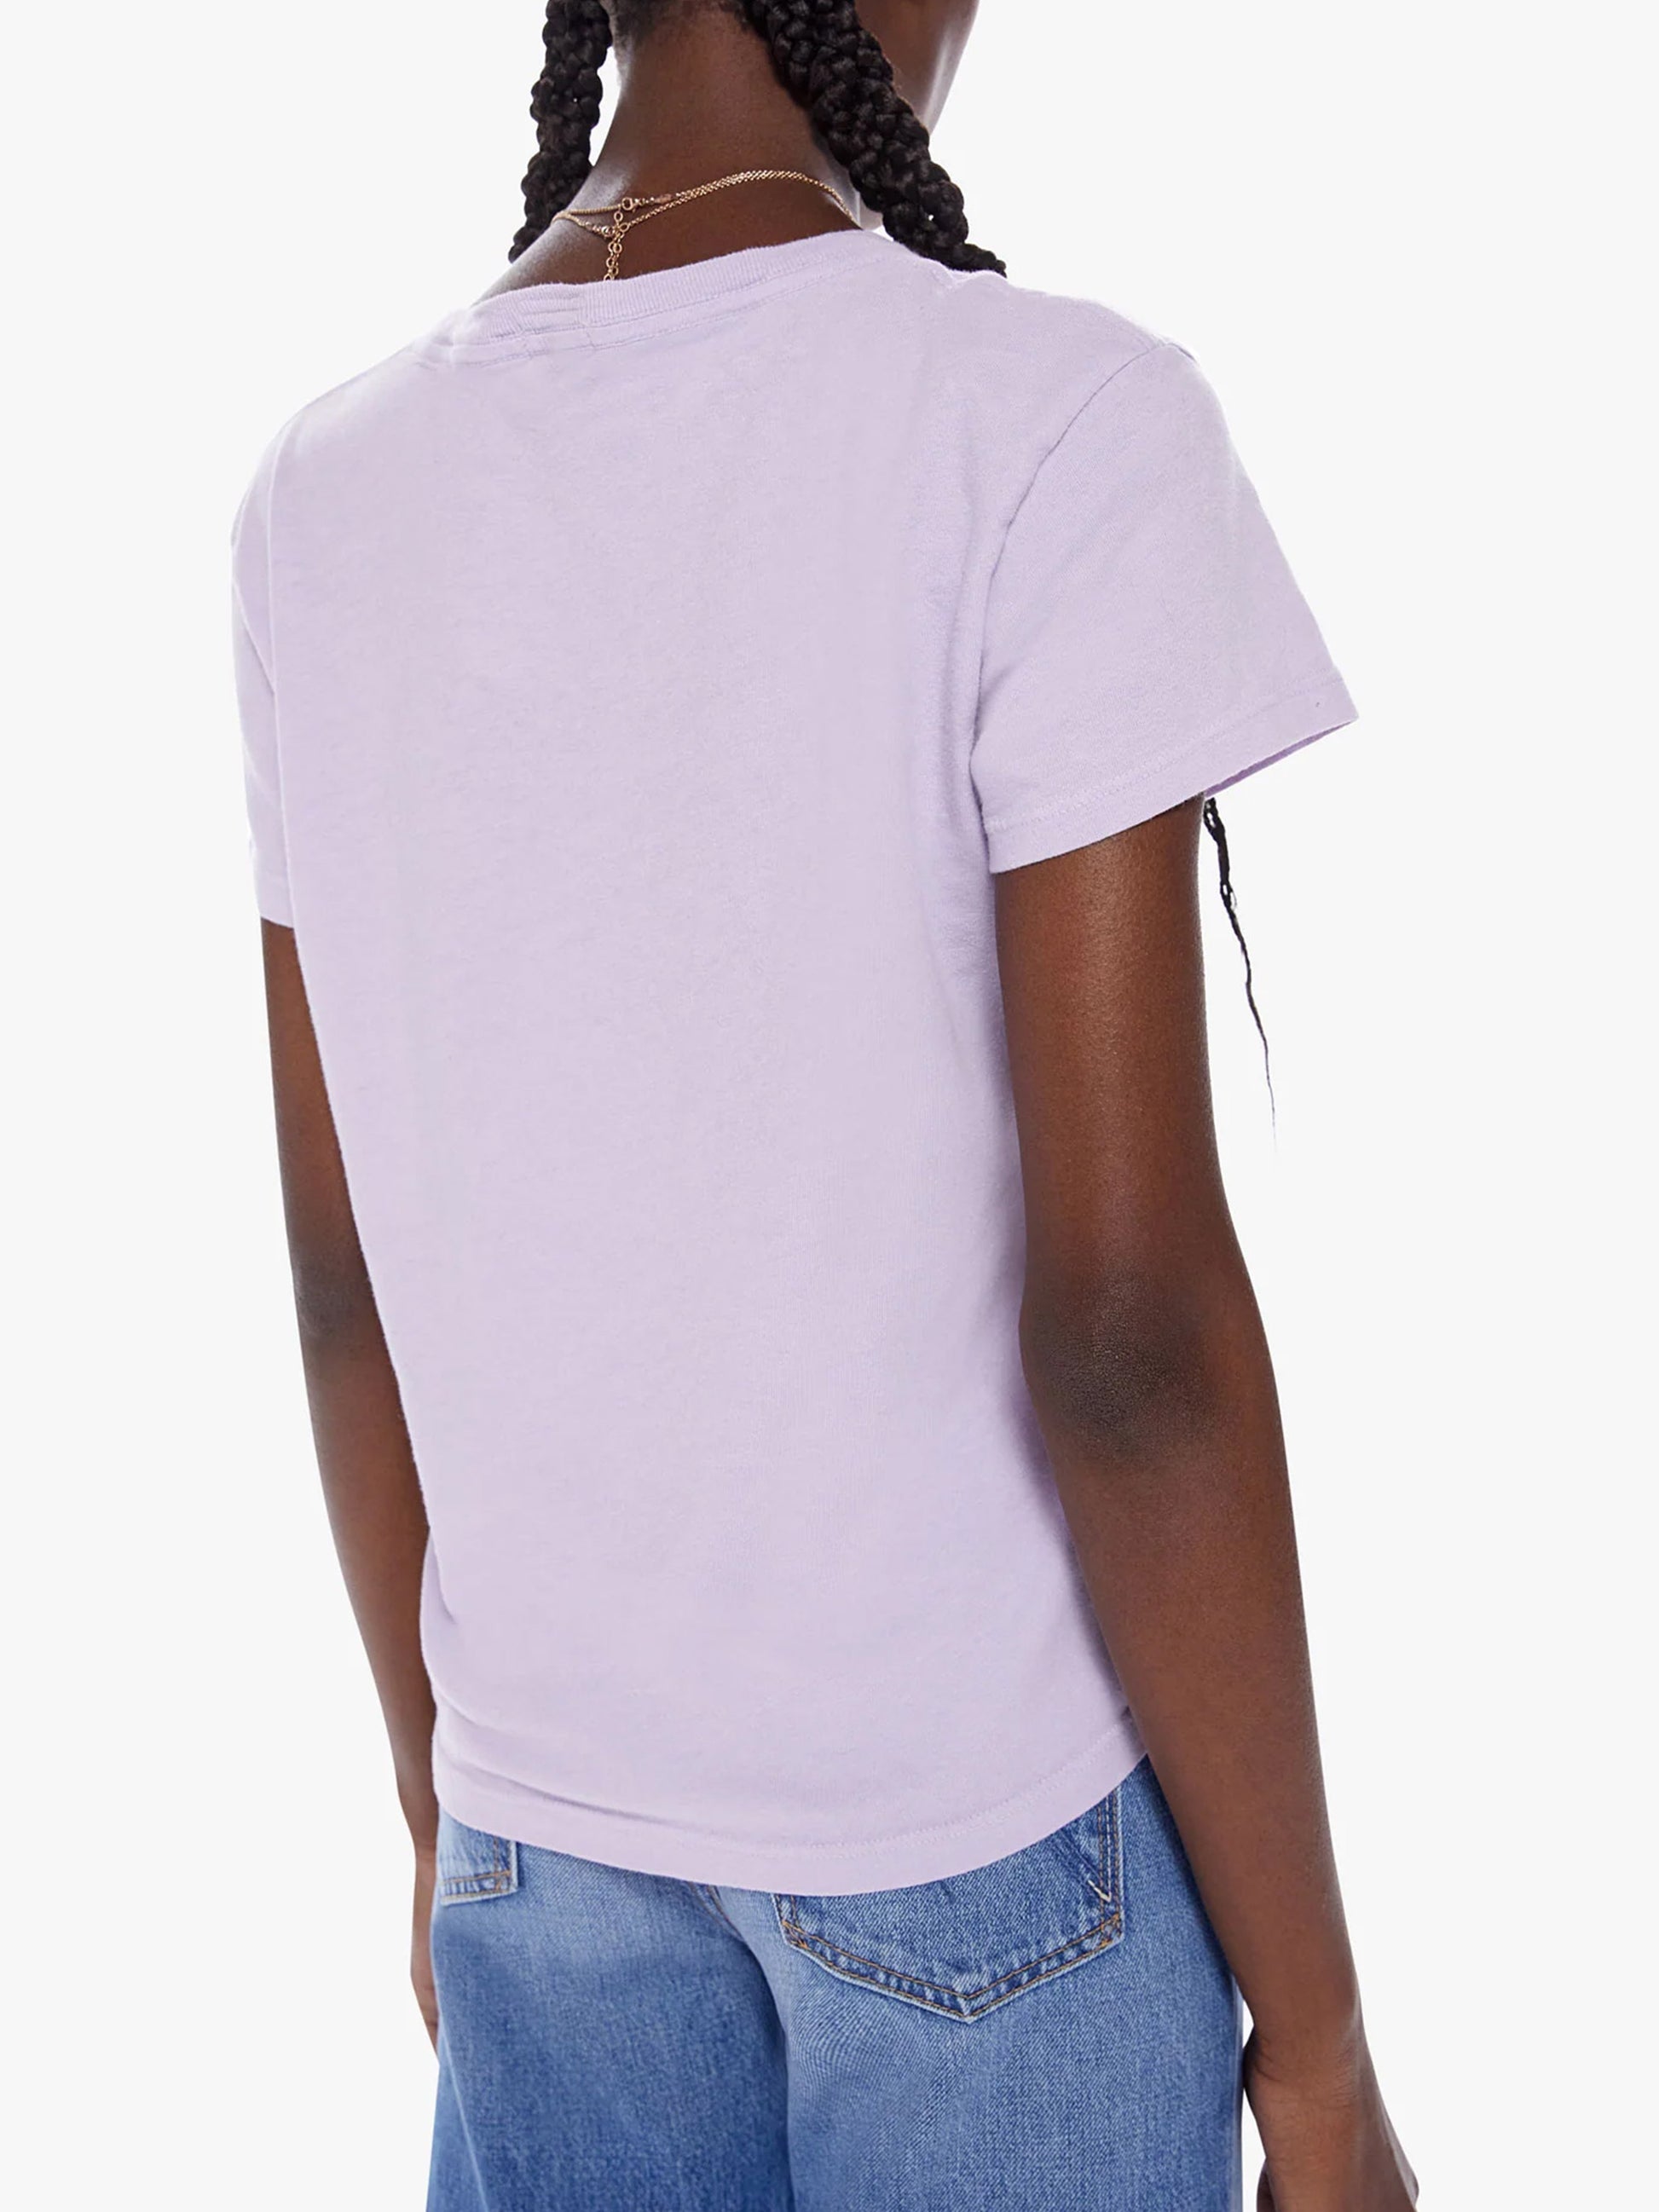 Rear view of a woman wearing a plain lavender crewneck tee and Mother Denim The Boxy Goodie Goodie in Daisies Don't Tell, standing against a white background.